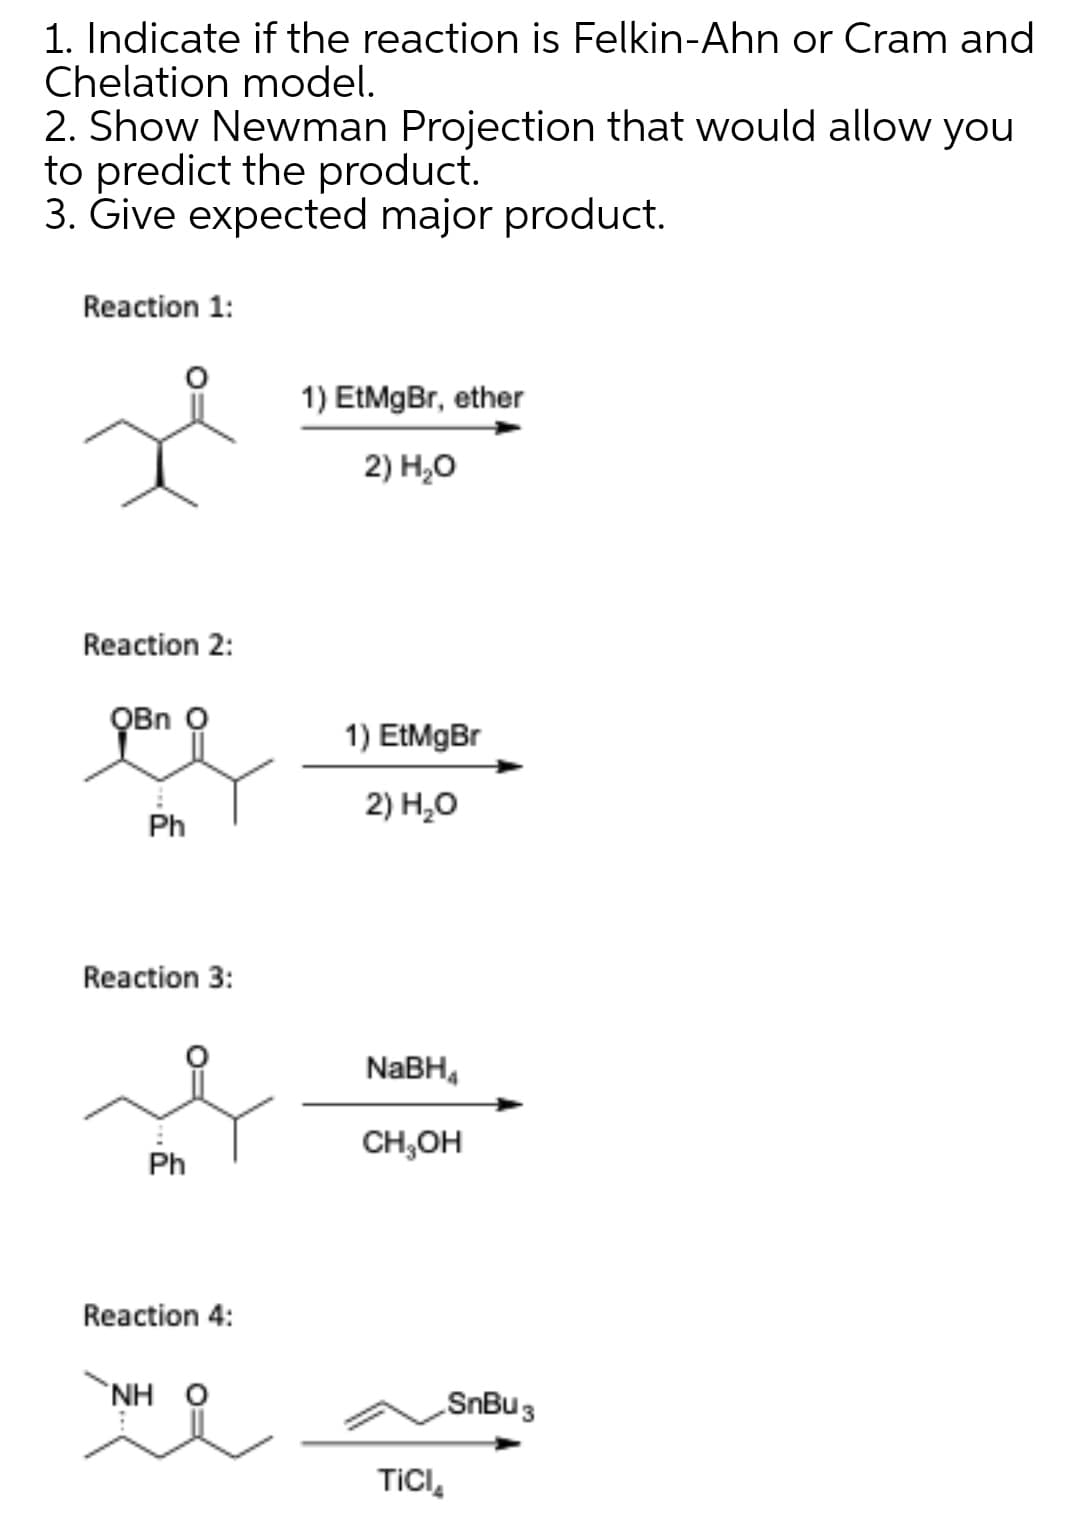 1. Indicate if the reaction is Felkin-Ahn or Cram and
Chelation model.
2. Show Newman Projection that would allow you
to predict the product.
3. Give expected major product.
Reaction 1:
1) EtMgBr, ether
2) Н,о
Reaction 2:
QBn O
1) EtMgBr
2) Н,О
Ph
Reaction 3:
NABH,
CH,OH
Ph
Reaction 4:
NH 0
SnBu 3
TICI,
